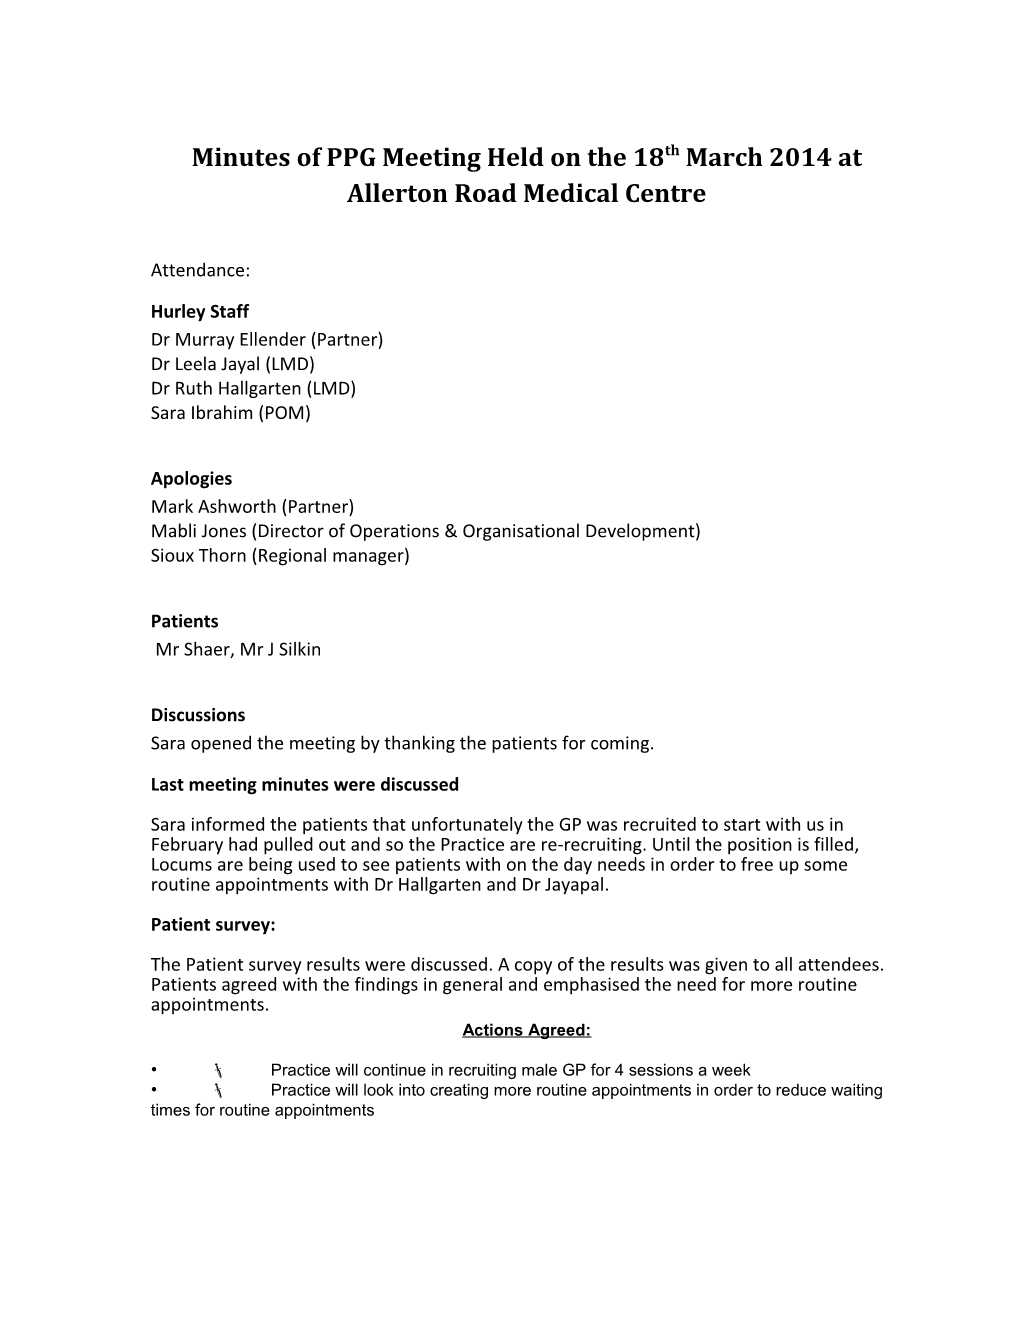 Minutes of PPG Meeting Held on the 18Th March 2014At Allerton Road Medical Centre